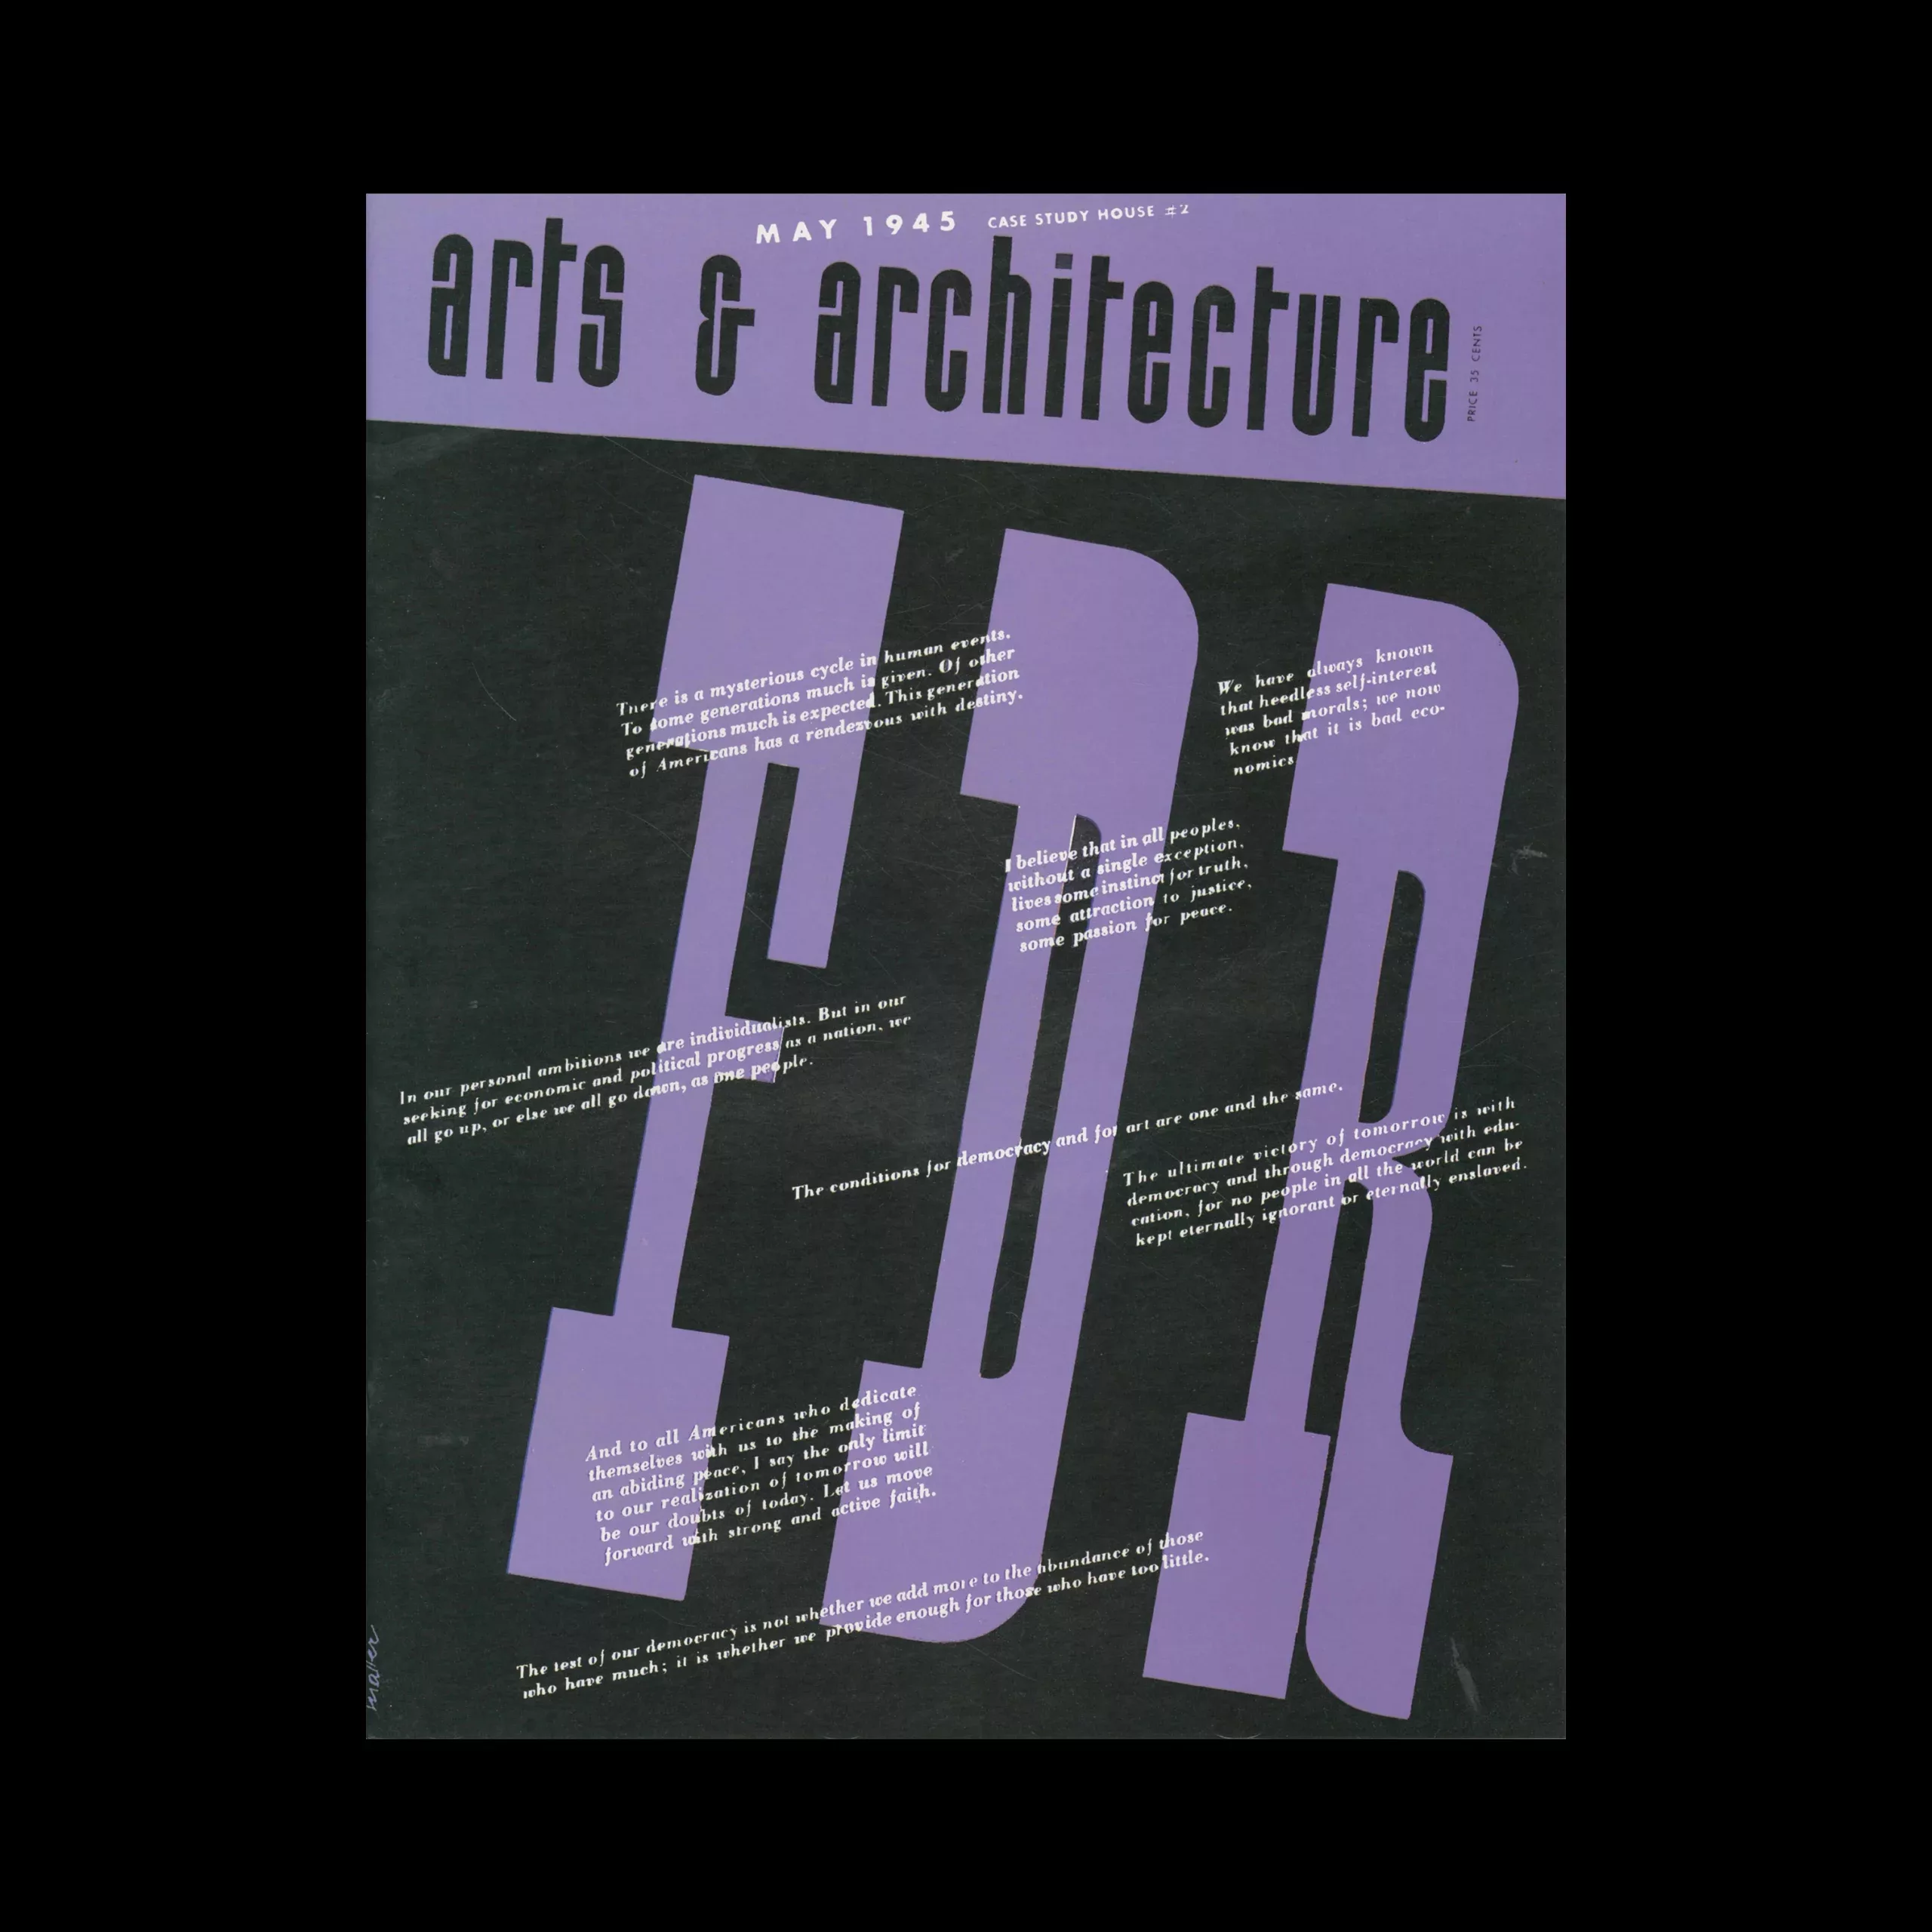 Arts & Architecture May 1945, Complete Reprint, Taschen, 2008. Cover design by Herbert Matter